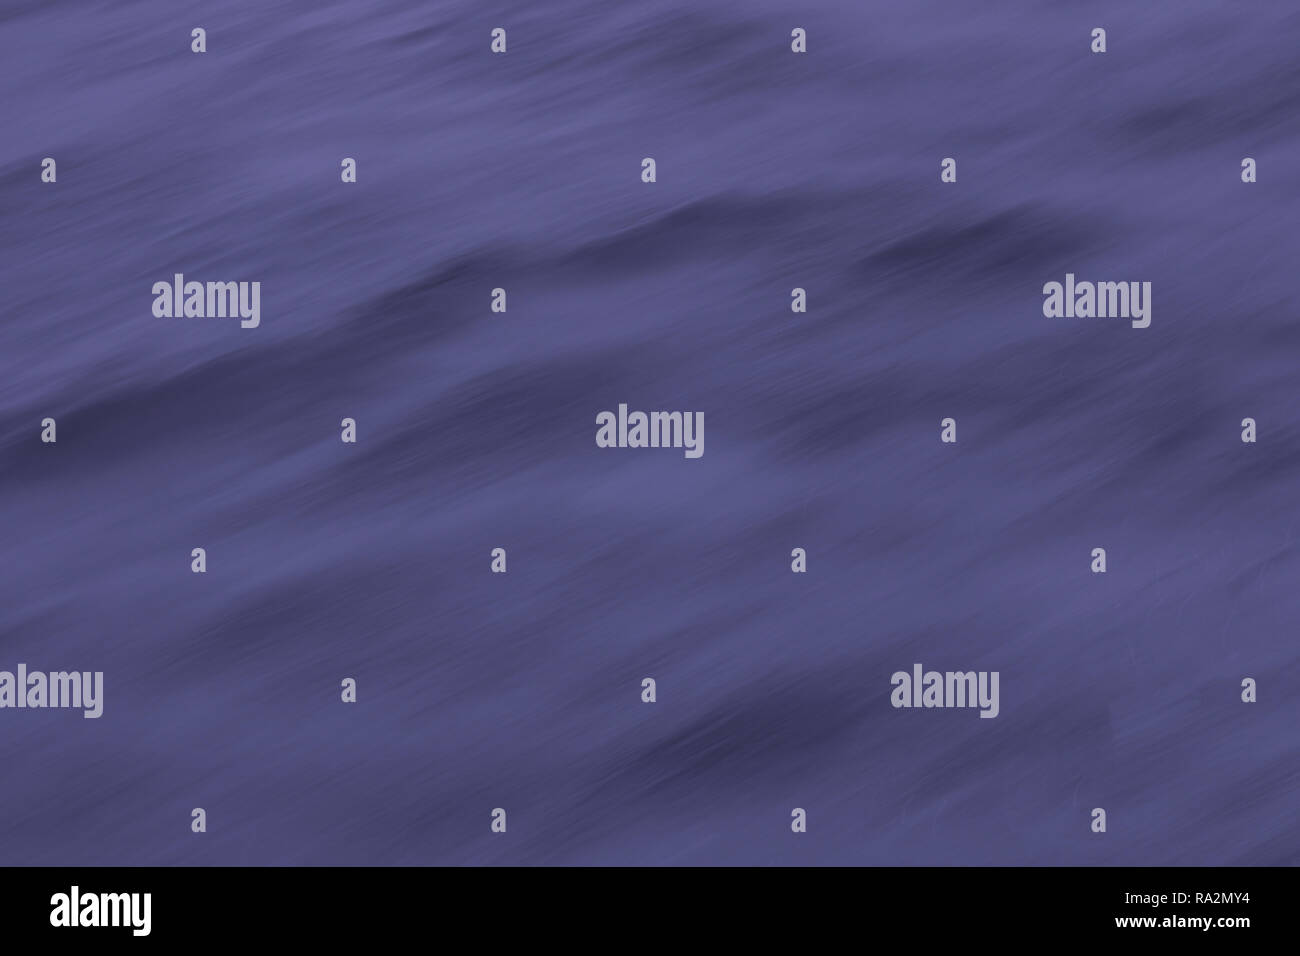 Blur abstract background dark blue color tone Stock Photo